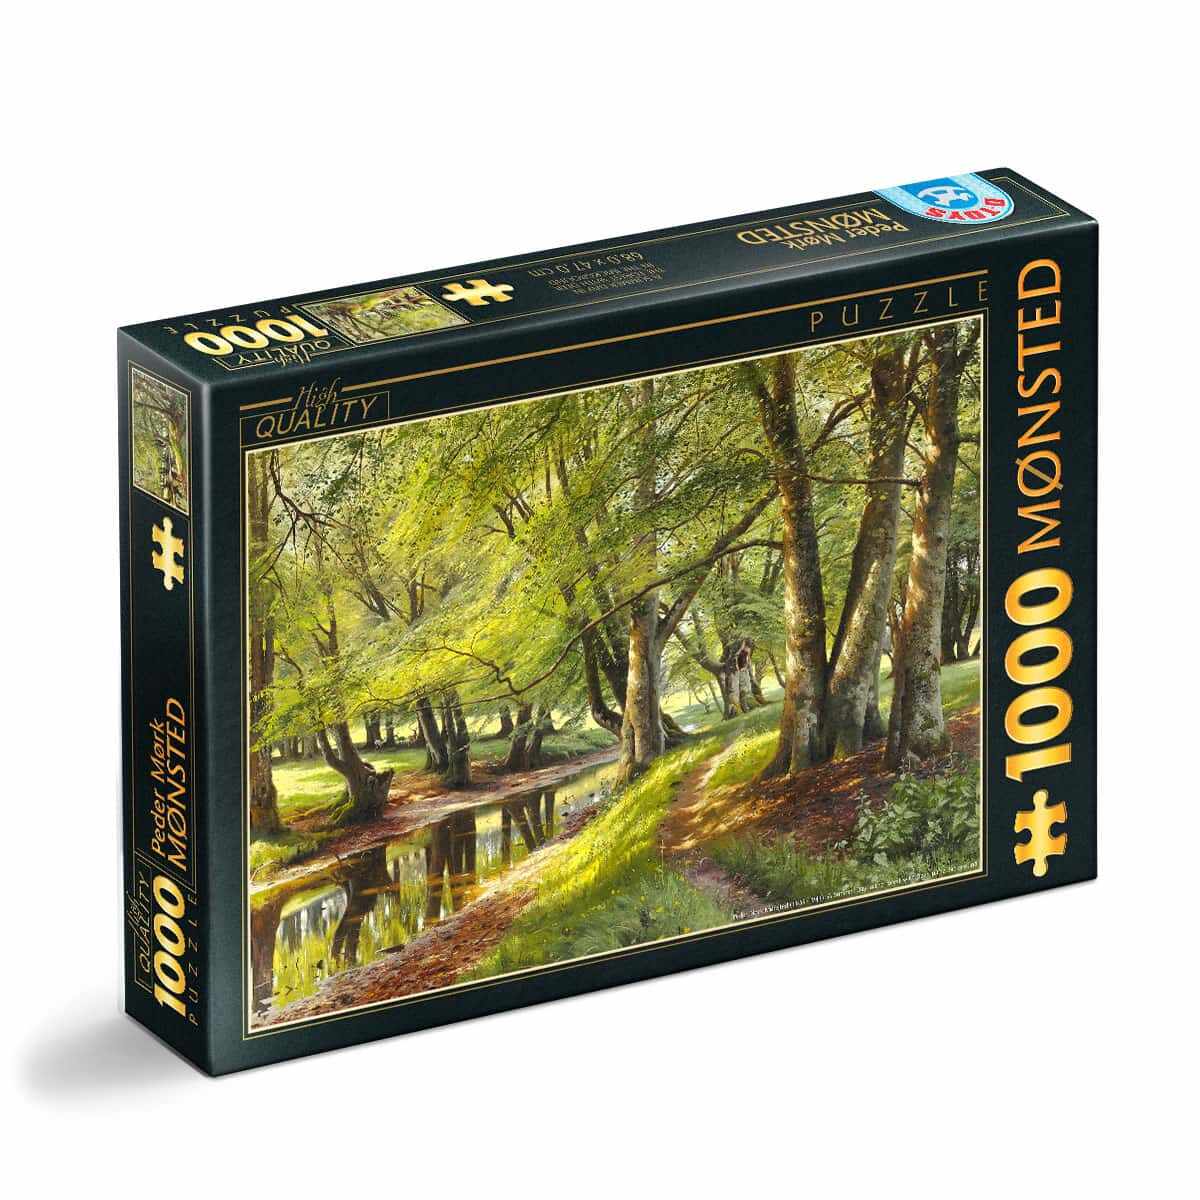 Puzzle Peder Mørk Mønsted - Puzzle adulți 1000 piese - A Summer Day in the Forest with Deer in the Background